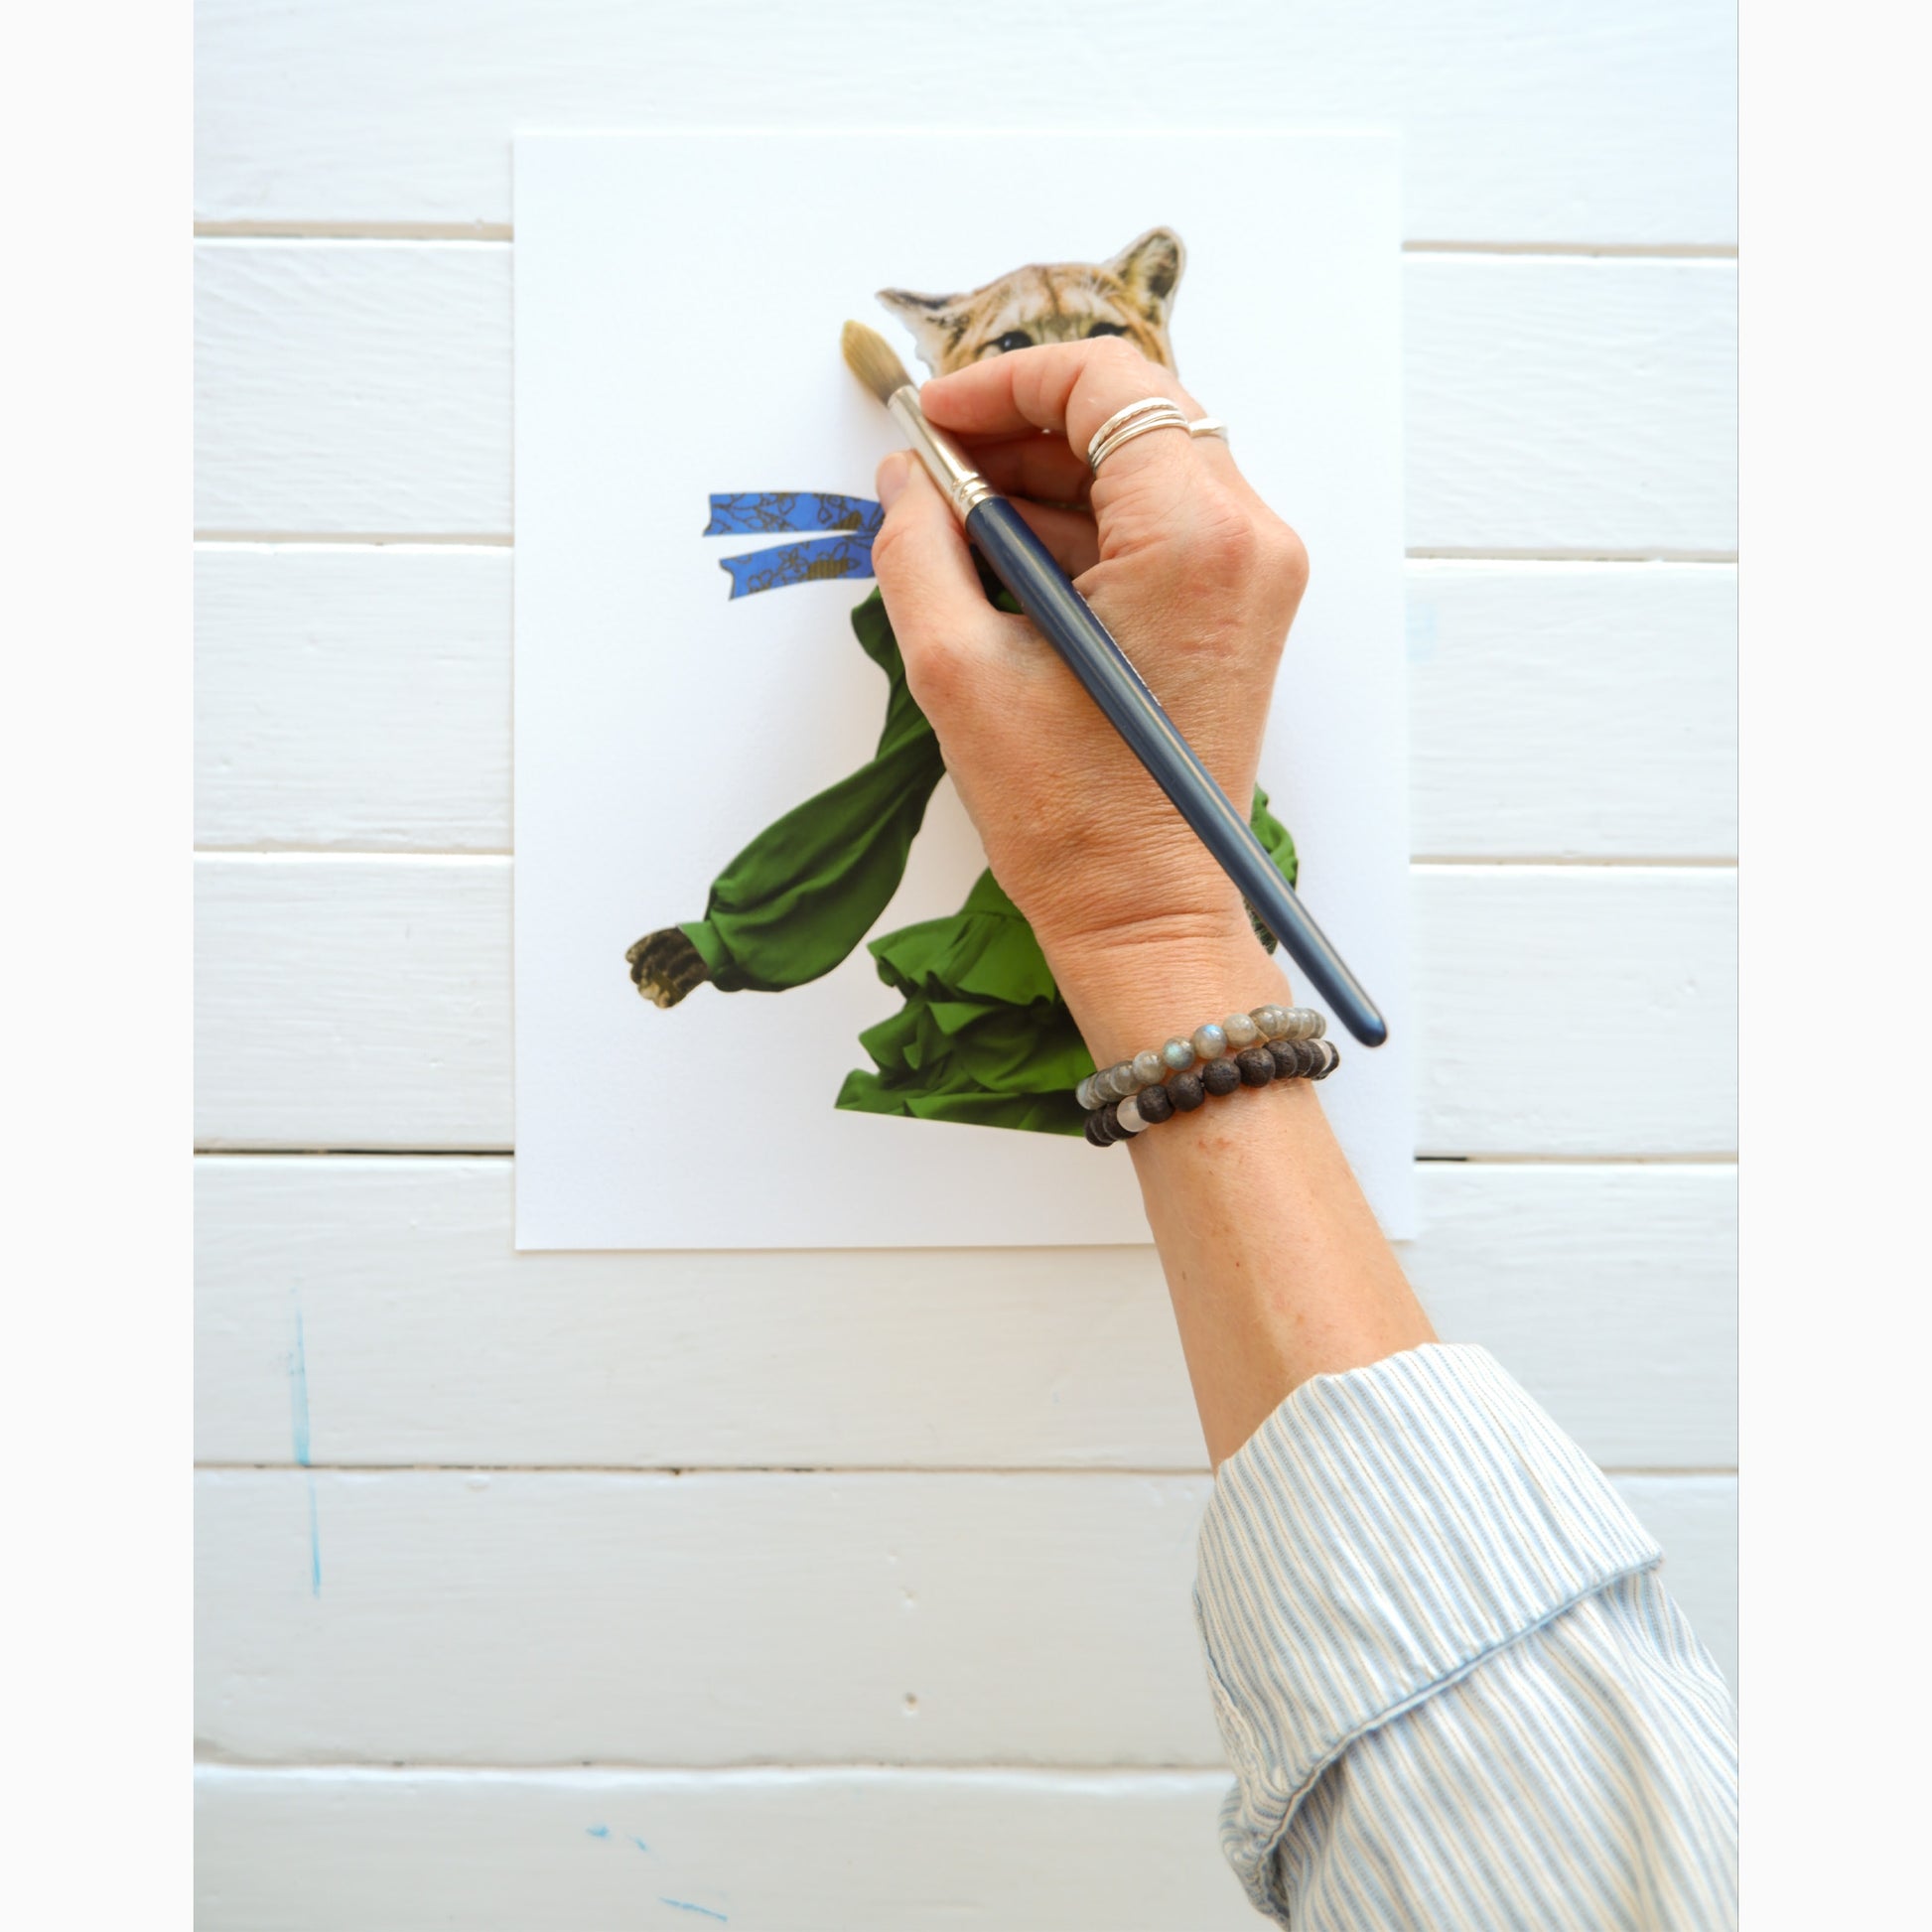 fine art print with artist's hand holding a paint brush showing the intention to add a hand painted embellishment to the print